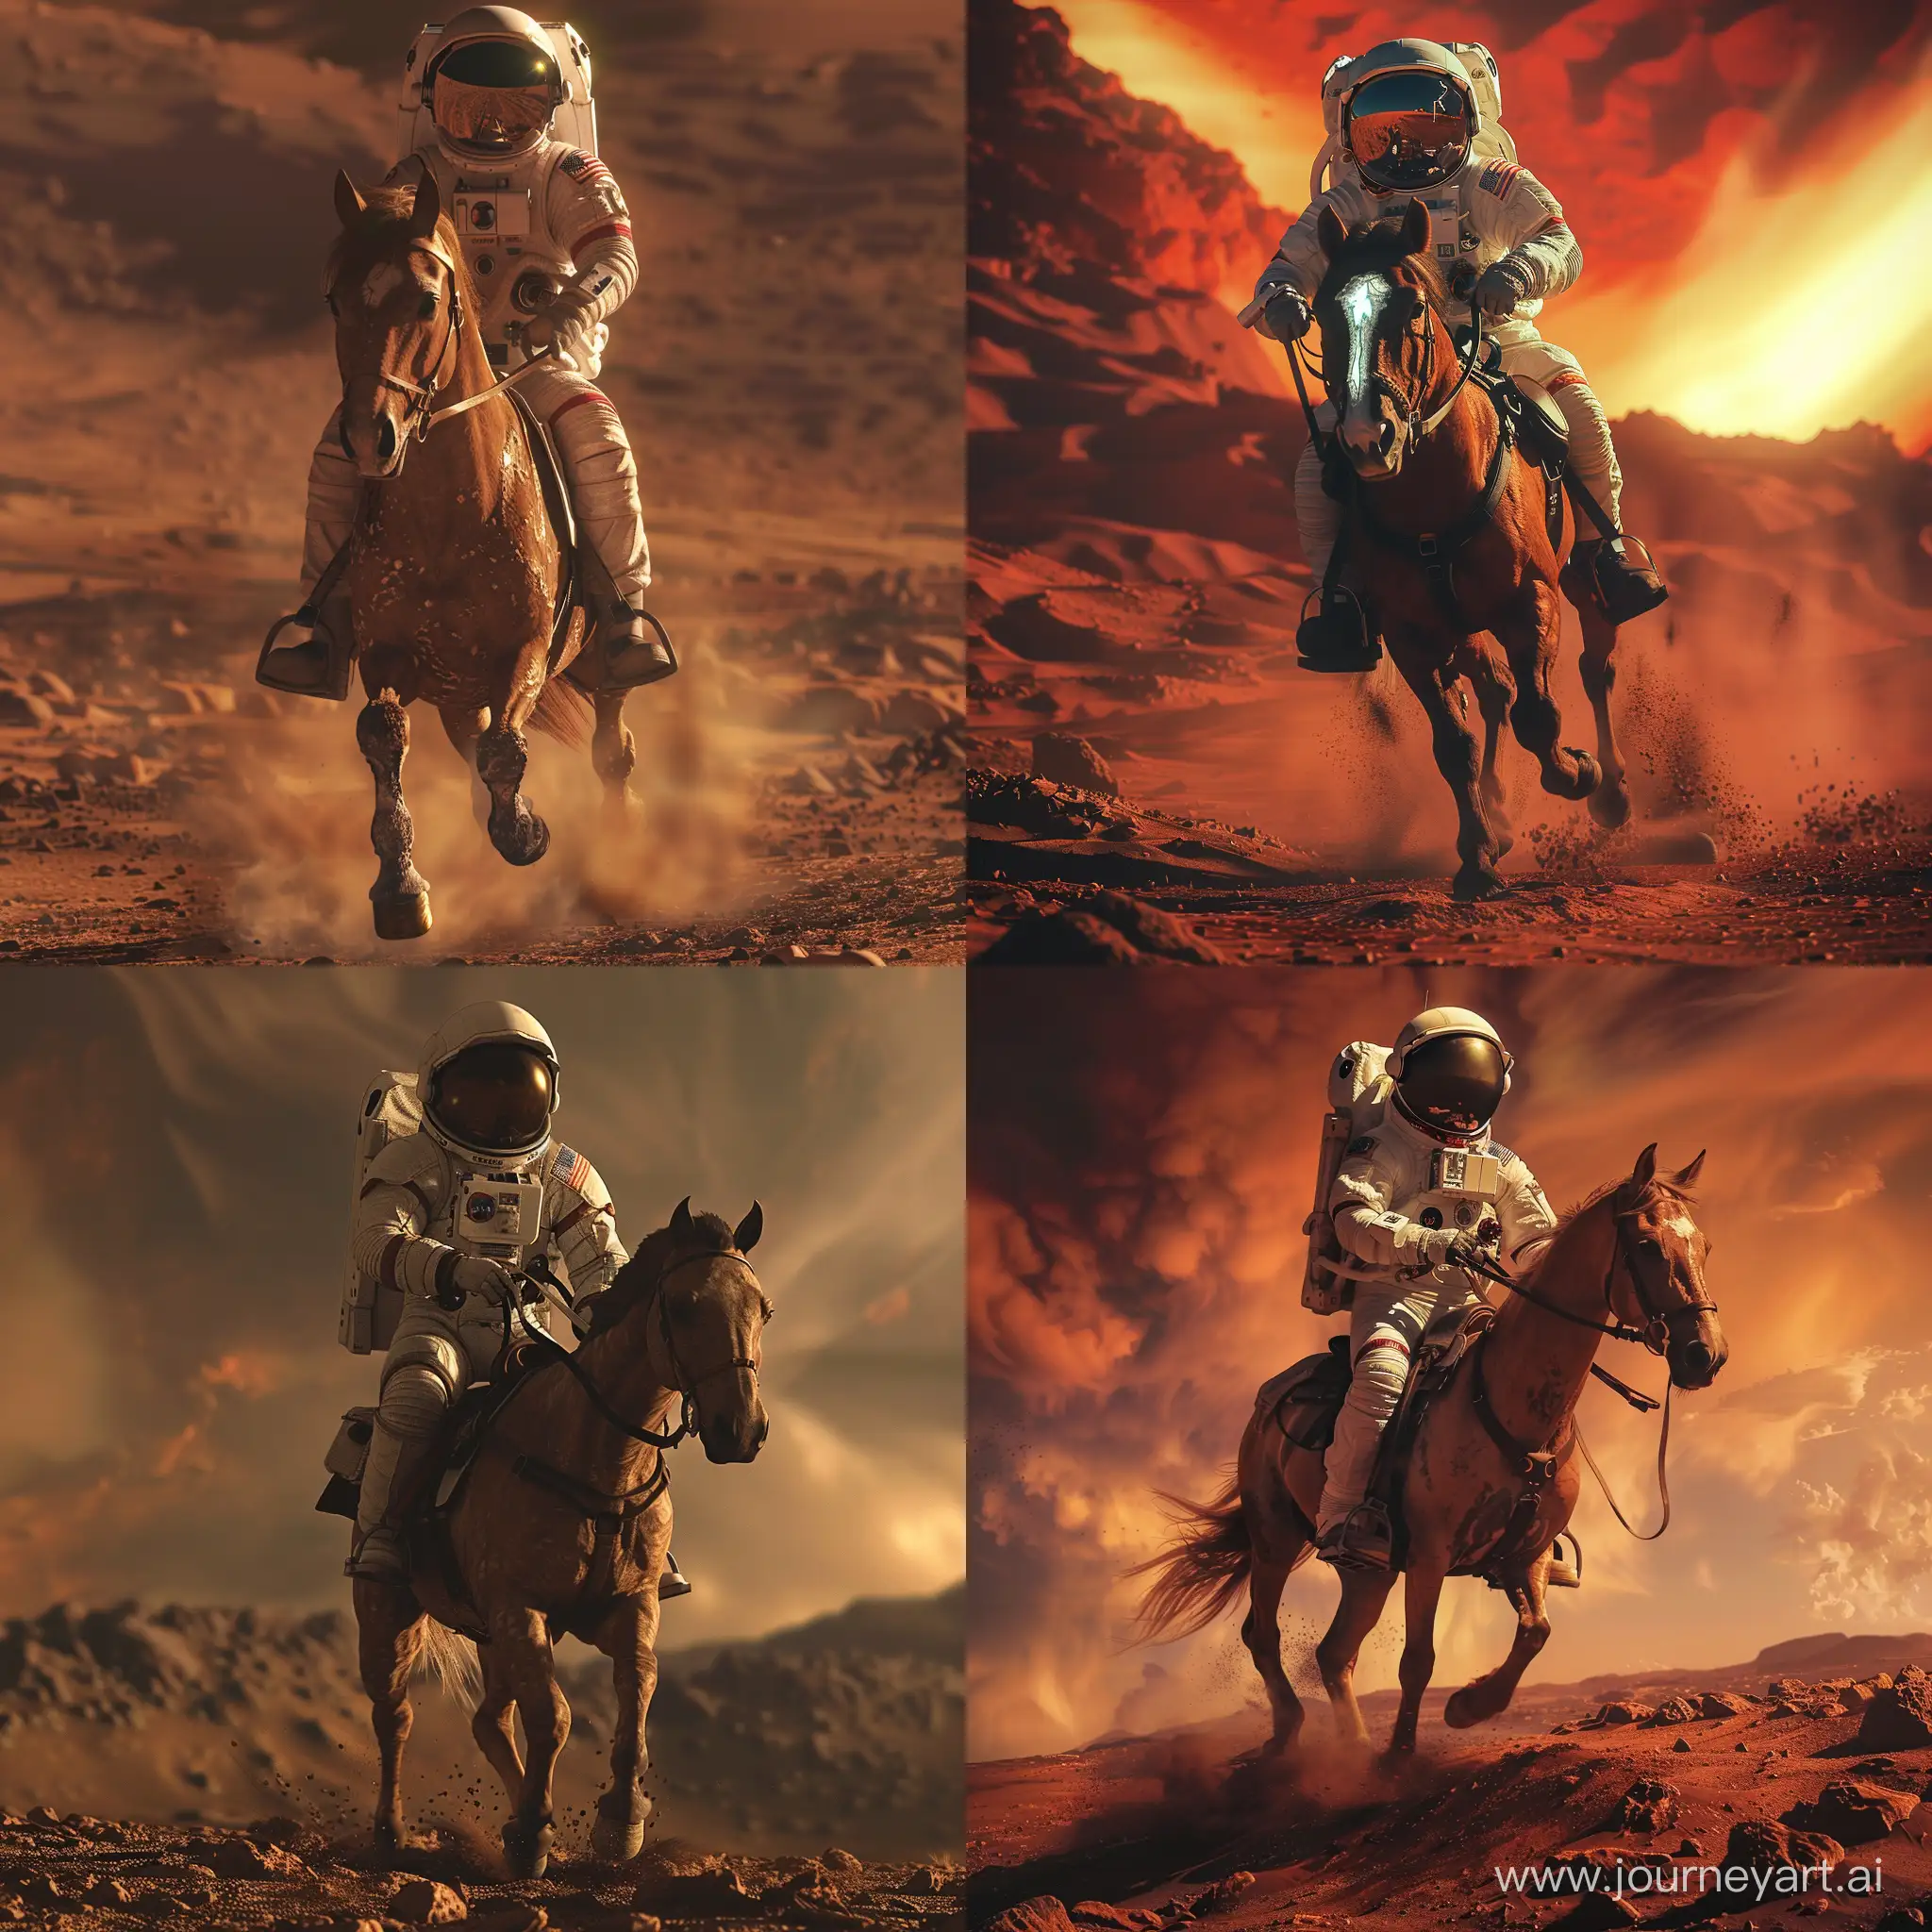 Astronaut-Riding-Horse-on-Mars-Epic-Journey-in-HighDefinition-with-Dramatic-Lighting